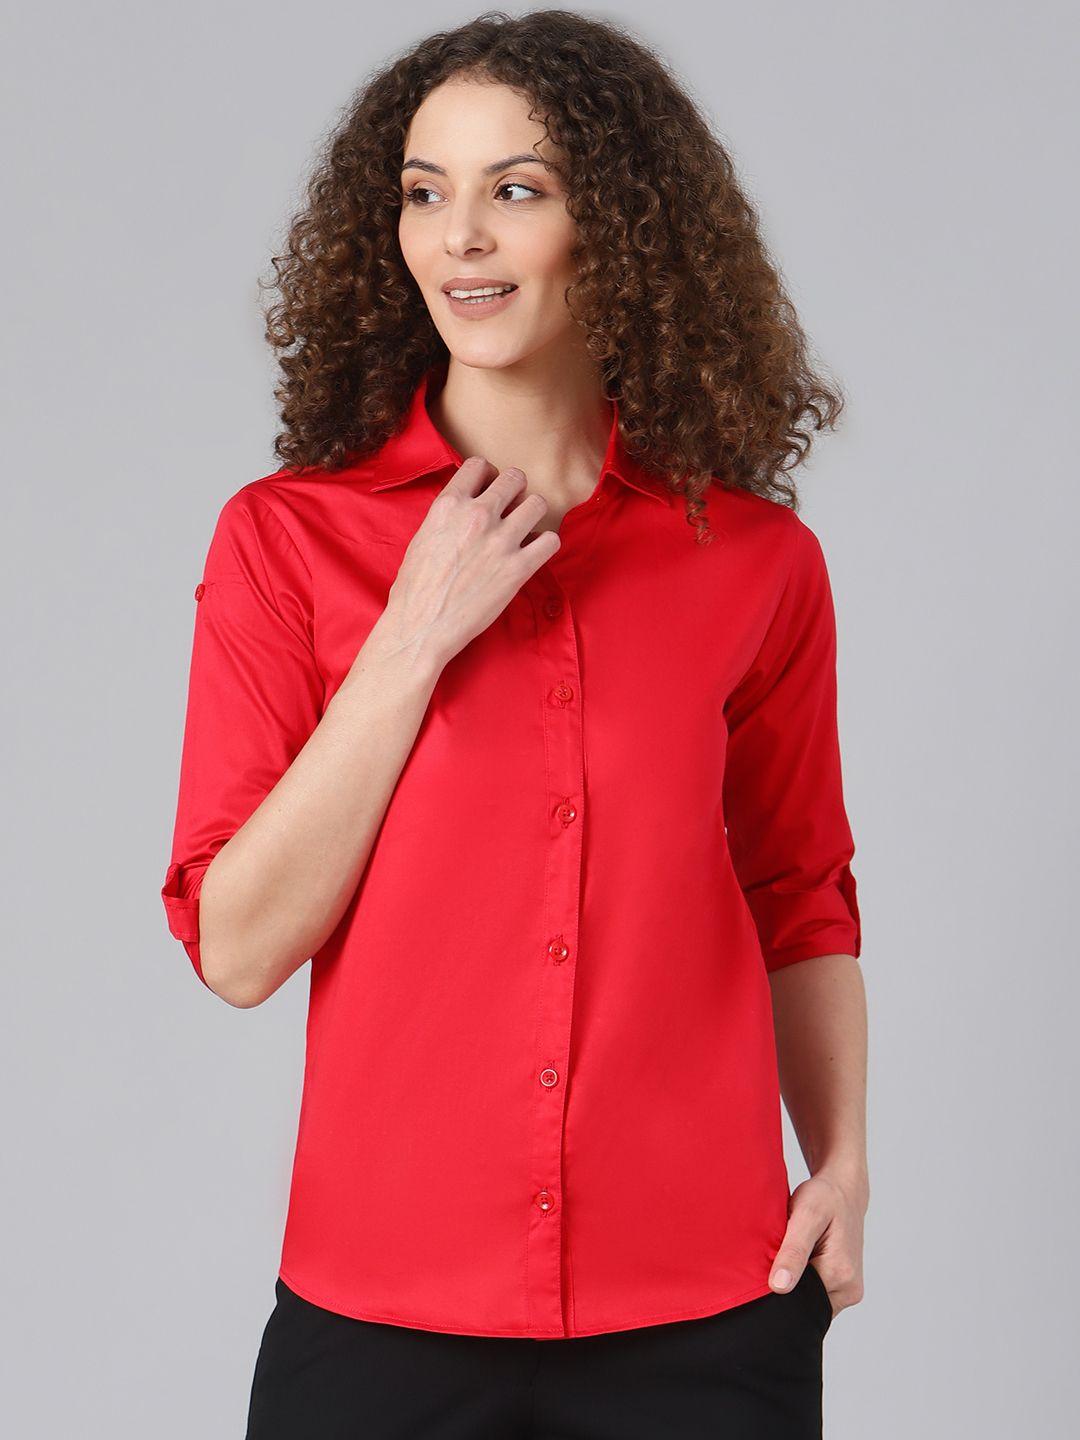 shaftesbury london women coral red smart slim fit solid formal shirt